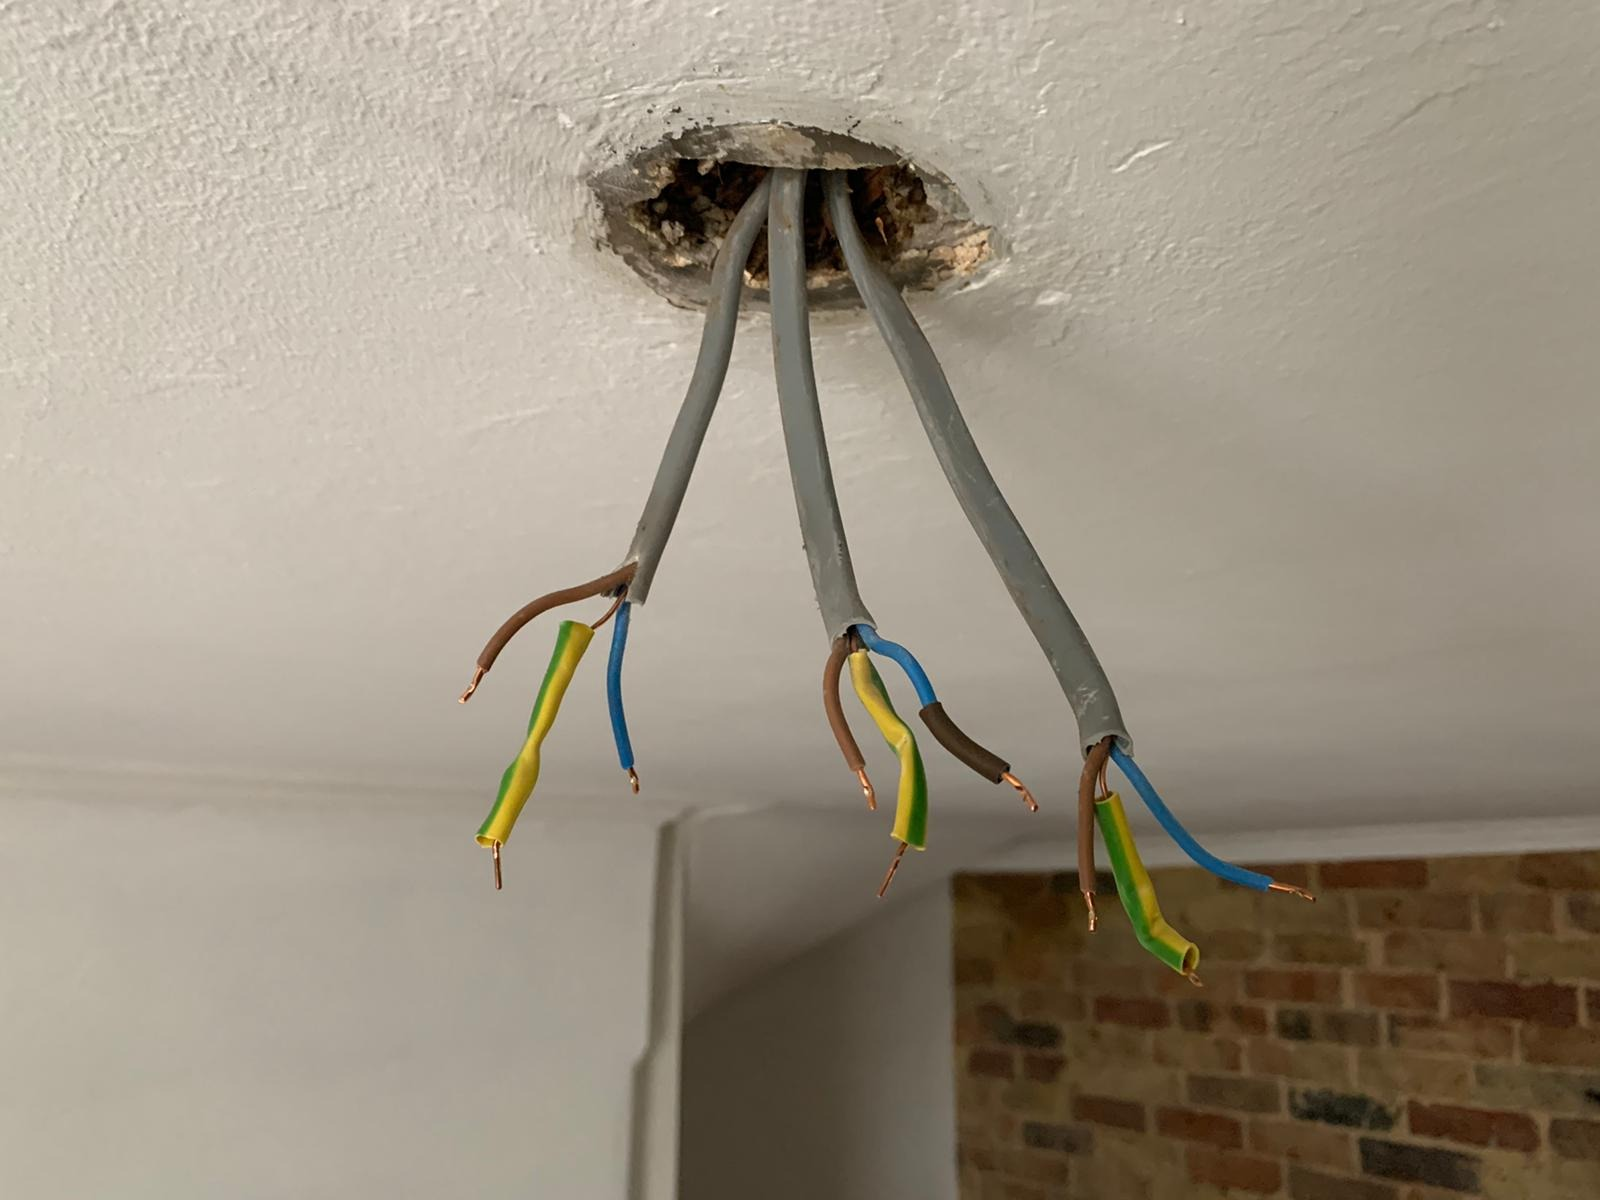 Ceiling Has 3 Sets Of Wires For